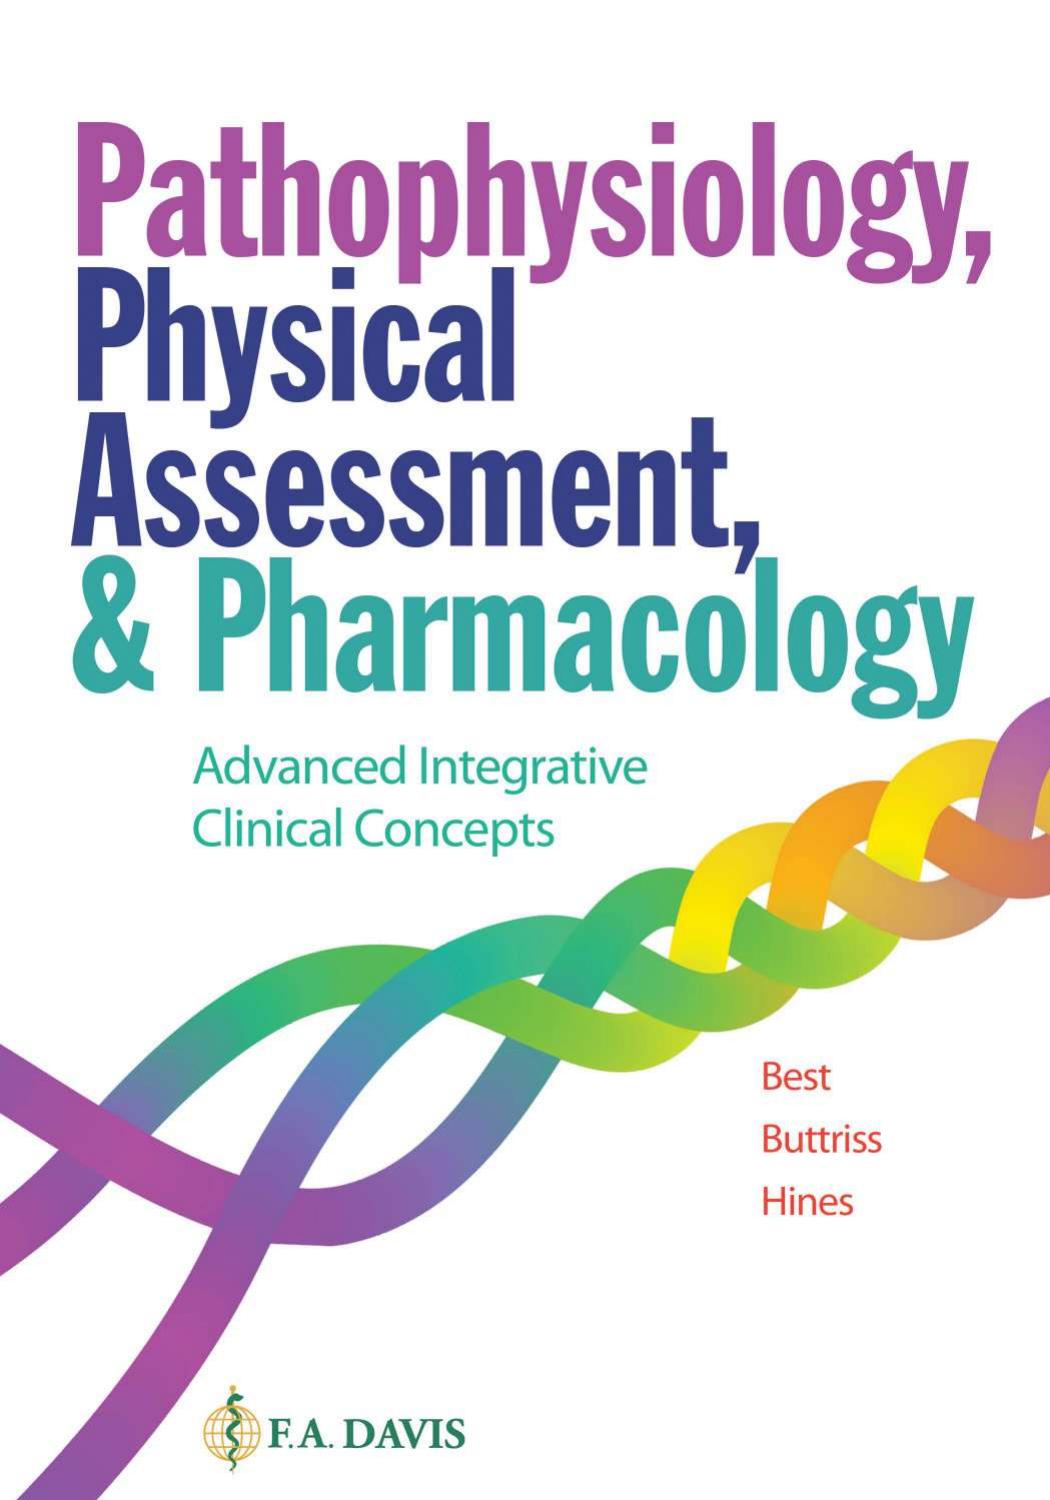 Pathophysiology, Physical Assessment, and Pharmacology Advanced Integrative Clinical Concepts, 2022